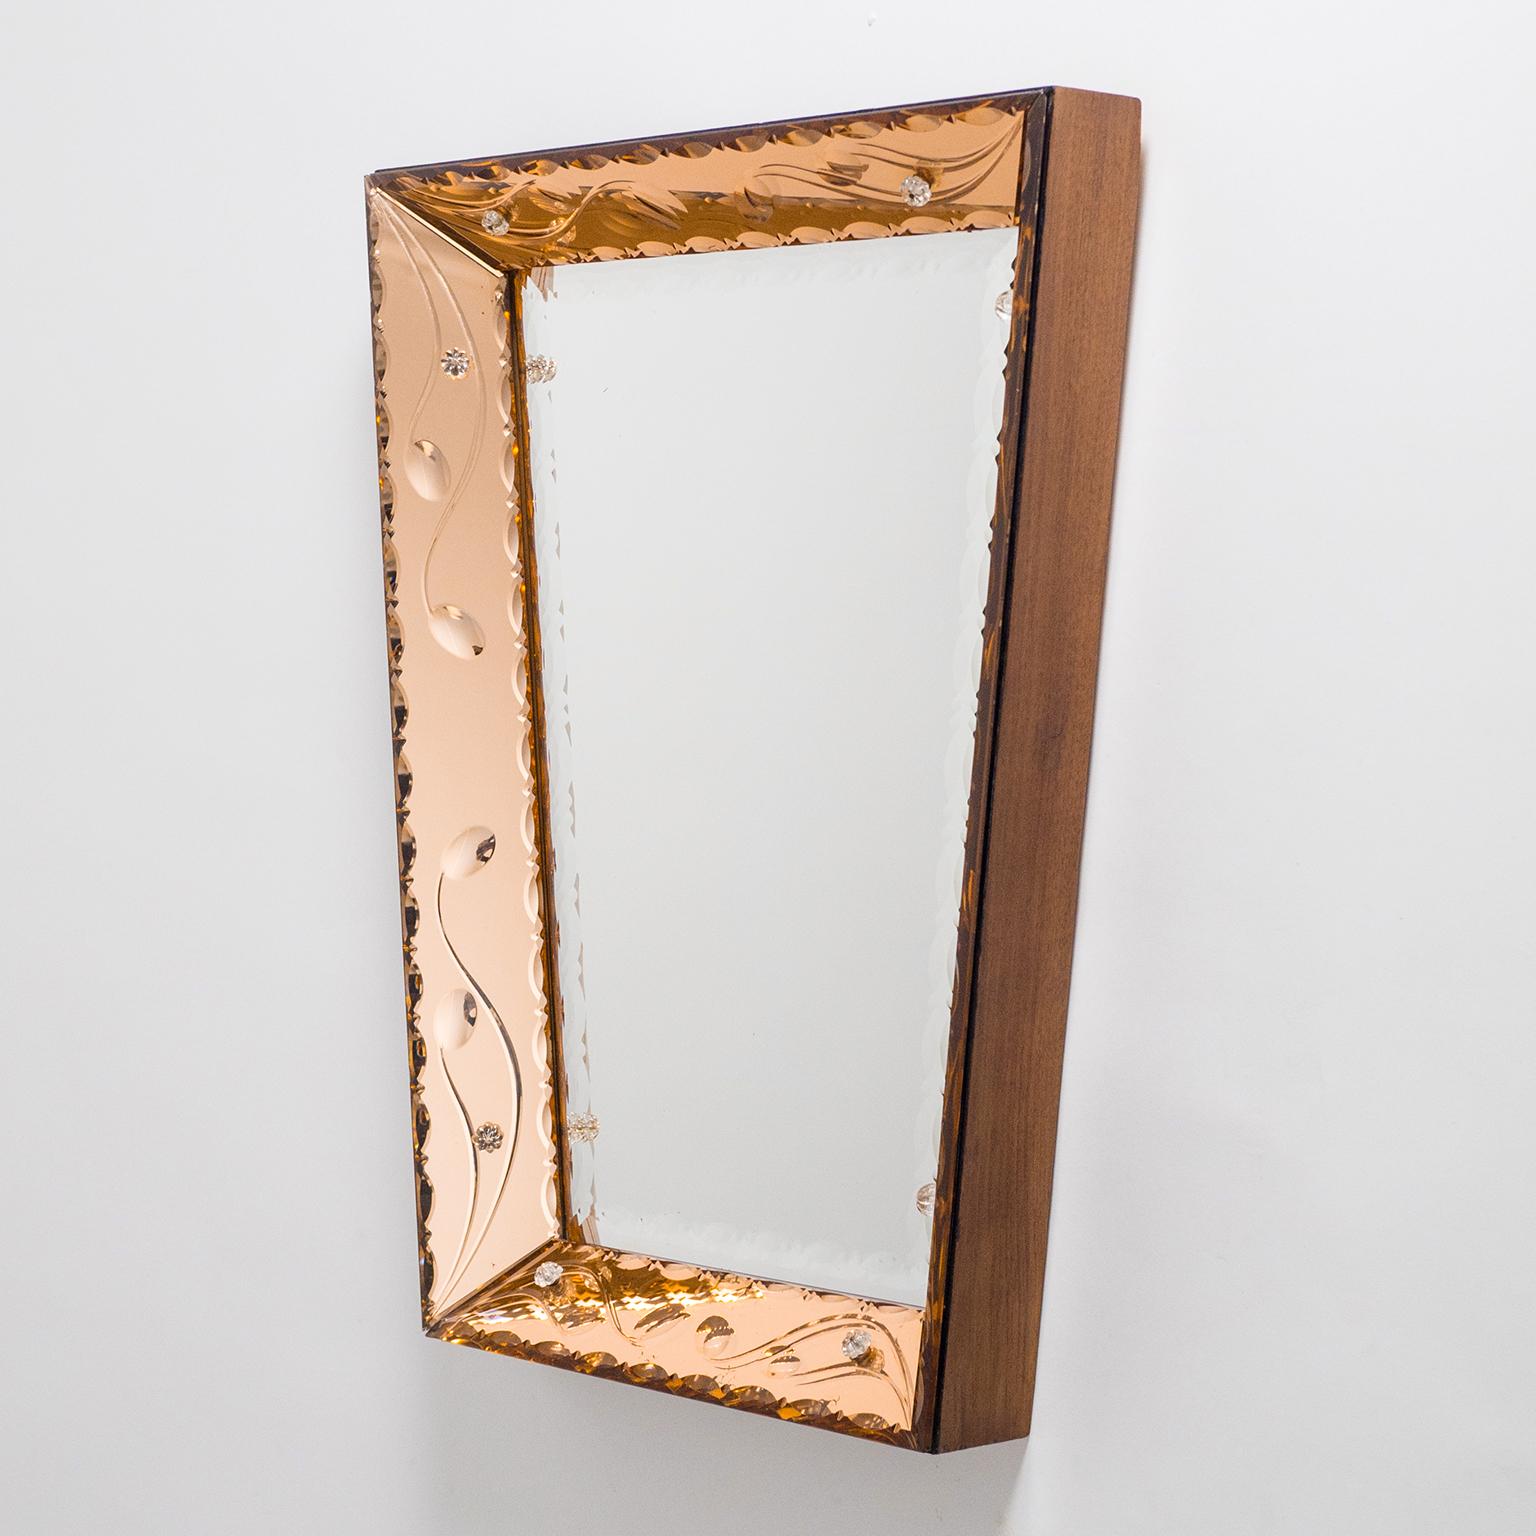 Beautiful Italian trapeze mirror with dual color mirrors. Inserted into a deep wooden frame are sheets of cut crystal glass in a copper or rose color as well as a clear mirror. Each of these are intricately beveled, scalopped and cut with abstracted